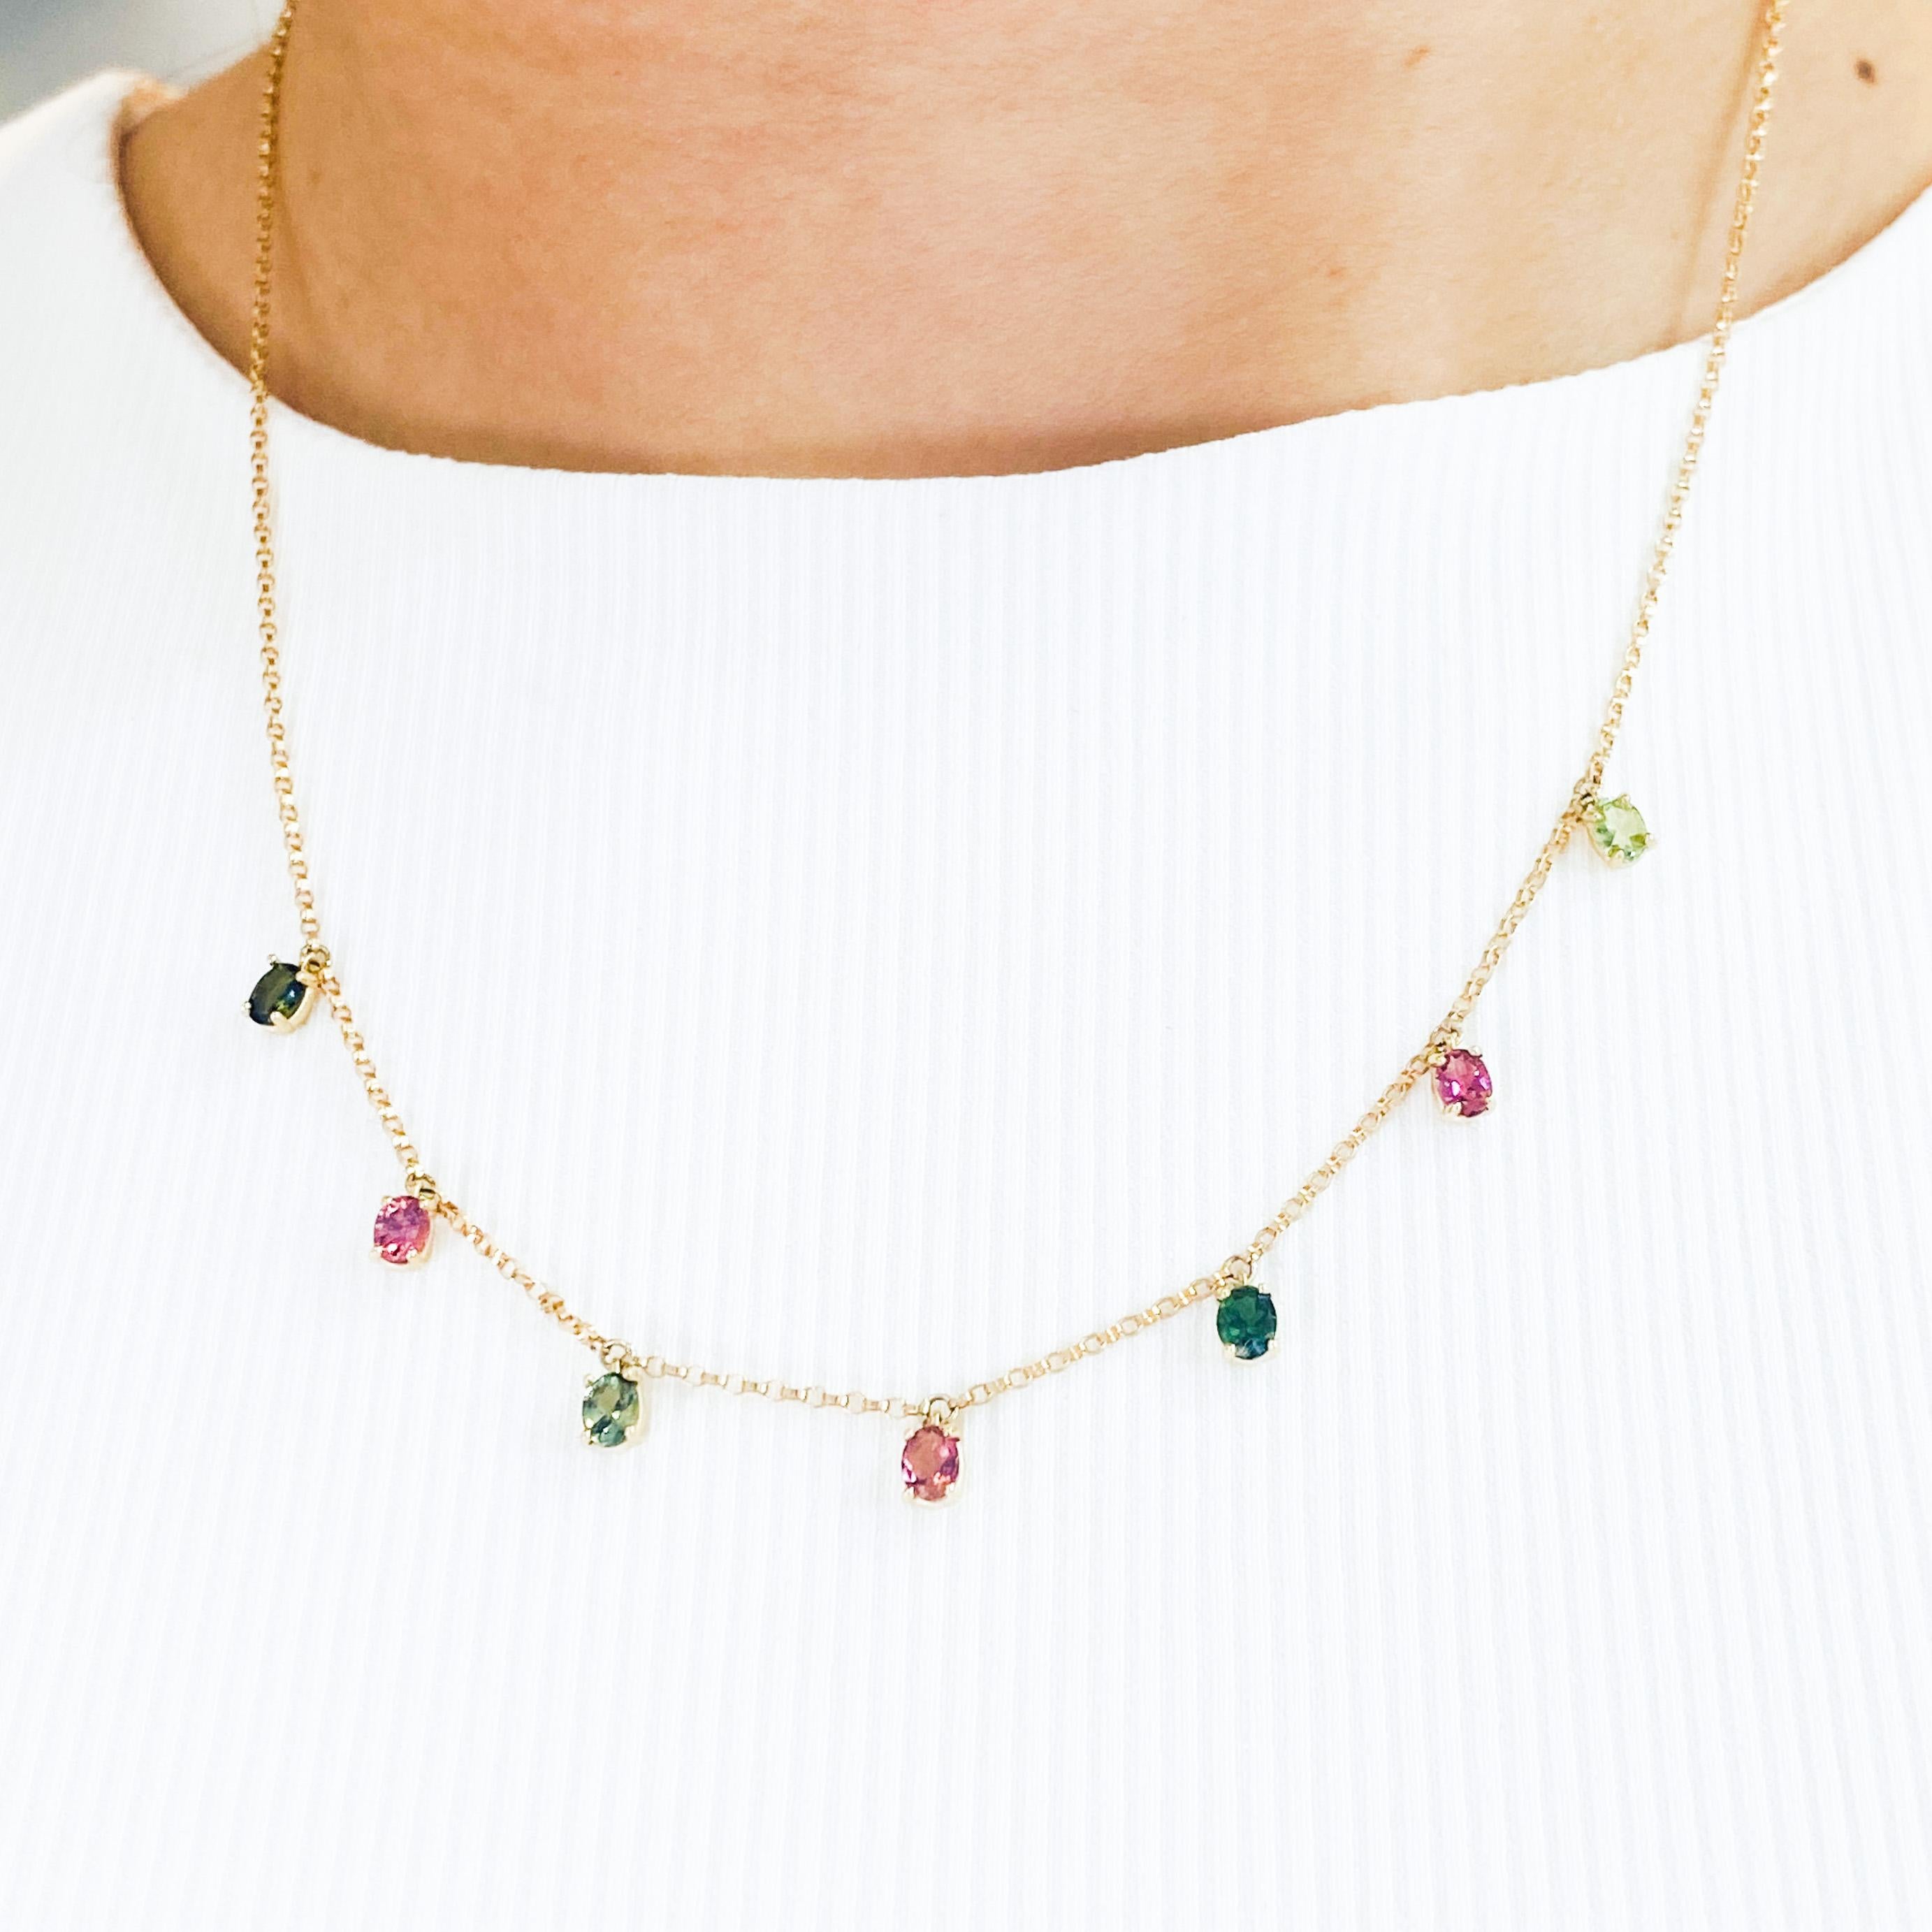 Add a dancing line of beautiful spring color tourmaline drops to your jewelry with this lovely necklace! The versatile colors can be worn year round! Celebrate an October loved one! Tourmaline is an alternative birthstone to opal for October! This